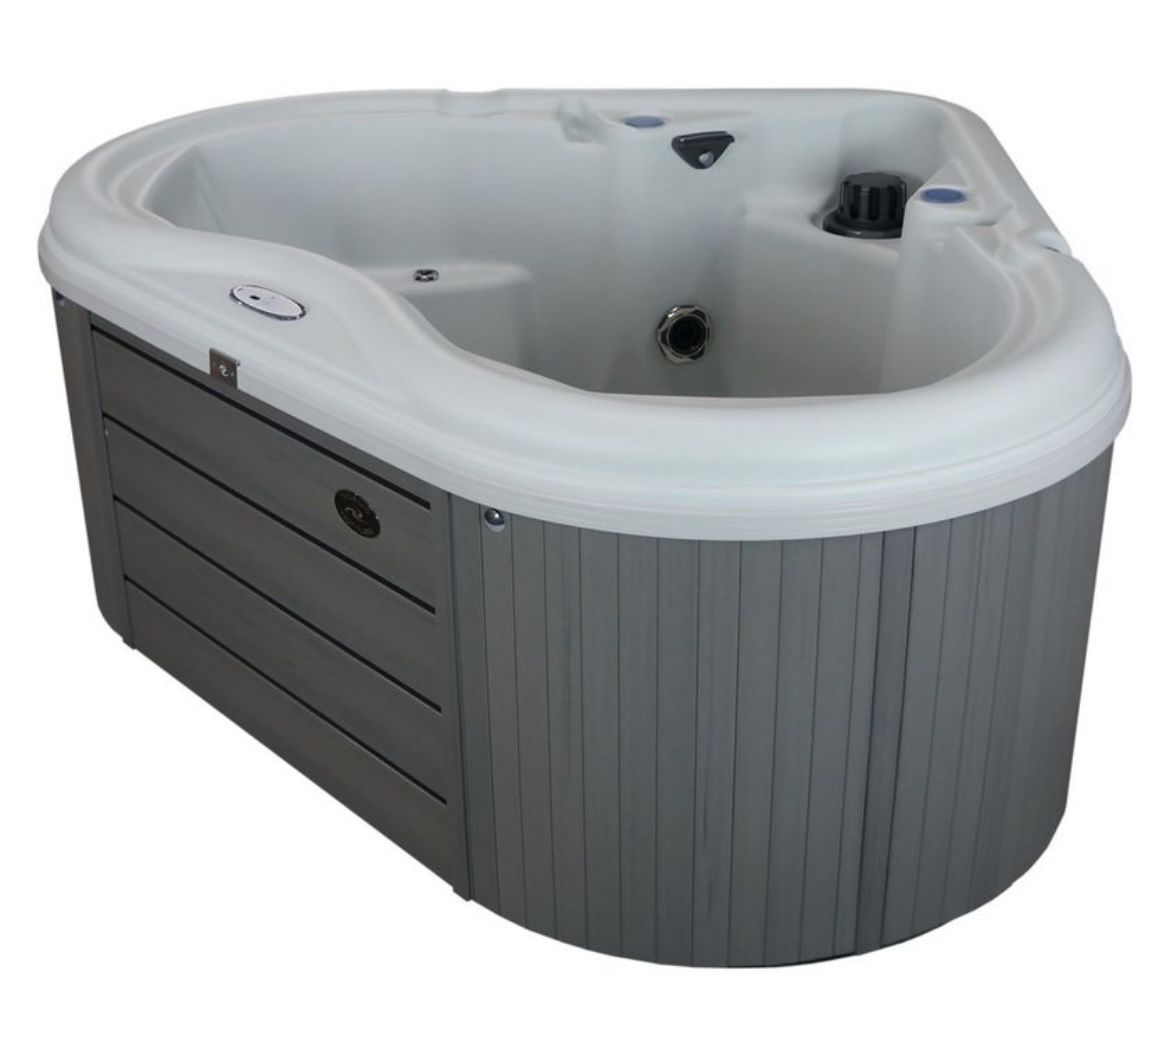 D’Amour MS Nordic Hot Tub 